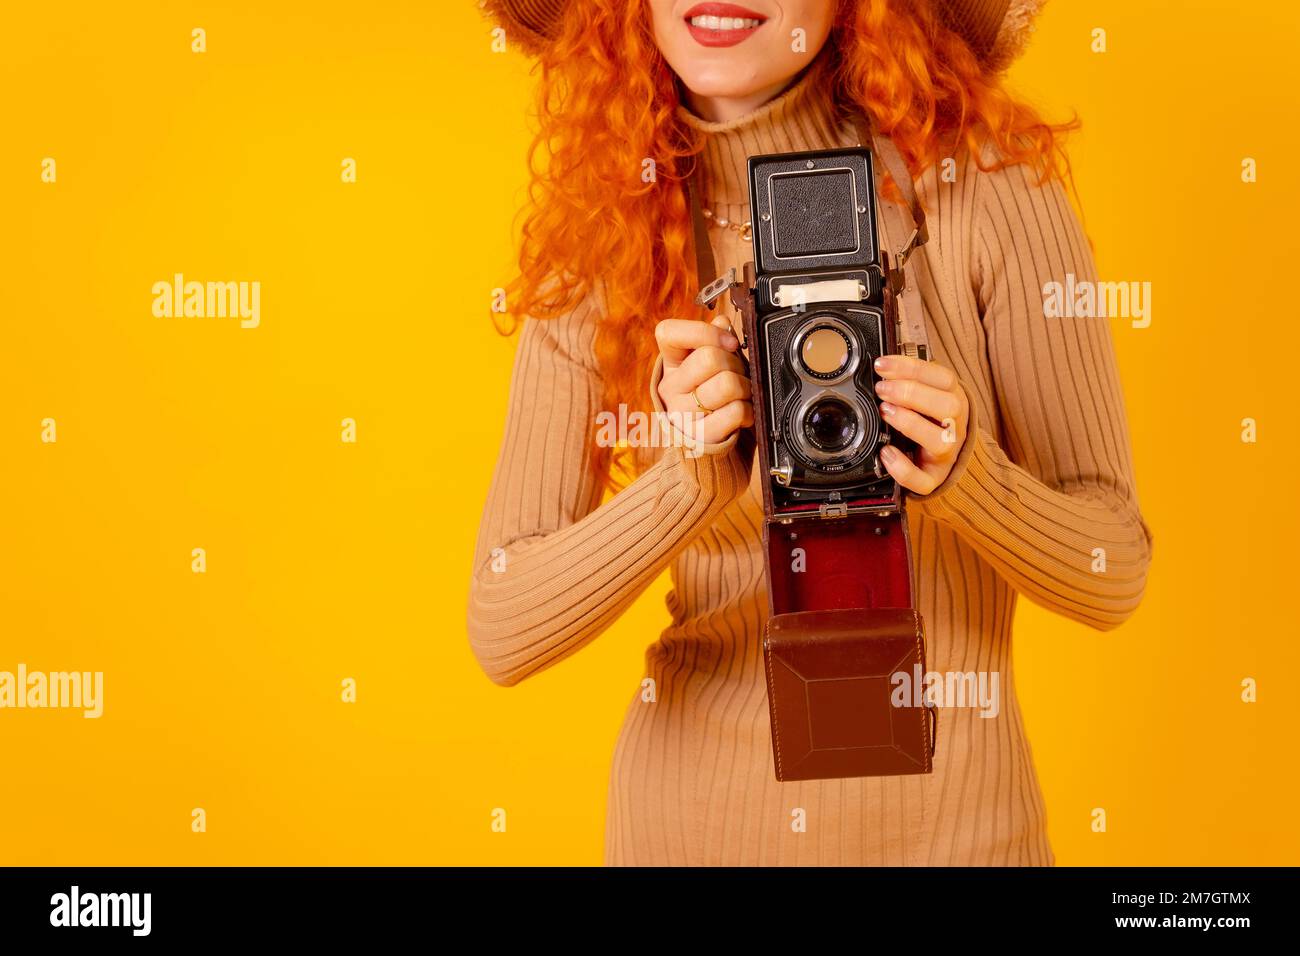 Unrecognizable redhead on a yellow background, copy space, with a vintage photo camera Stock Photo